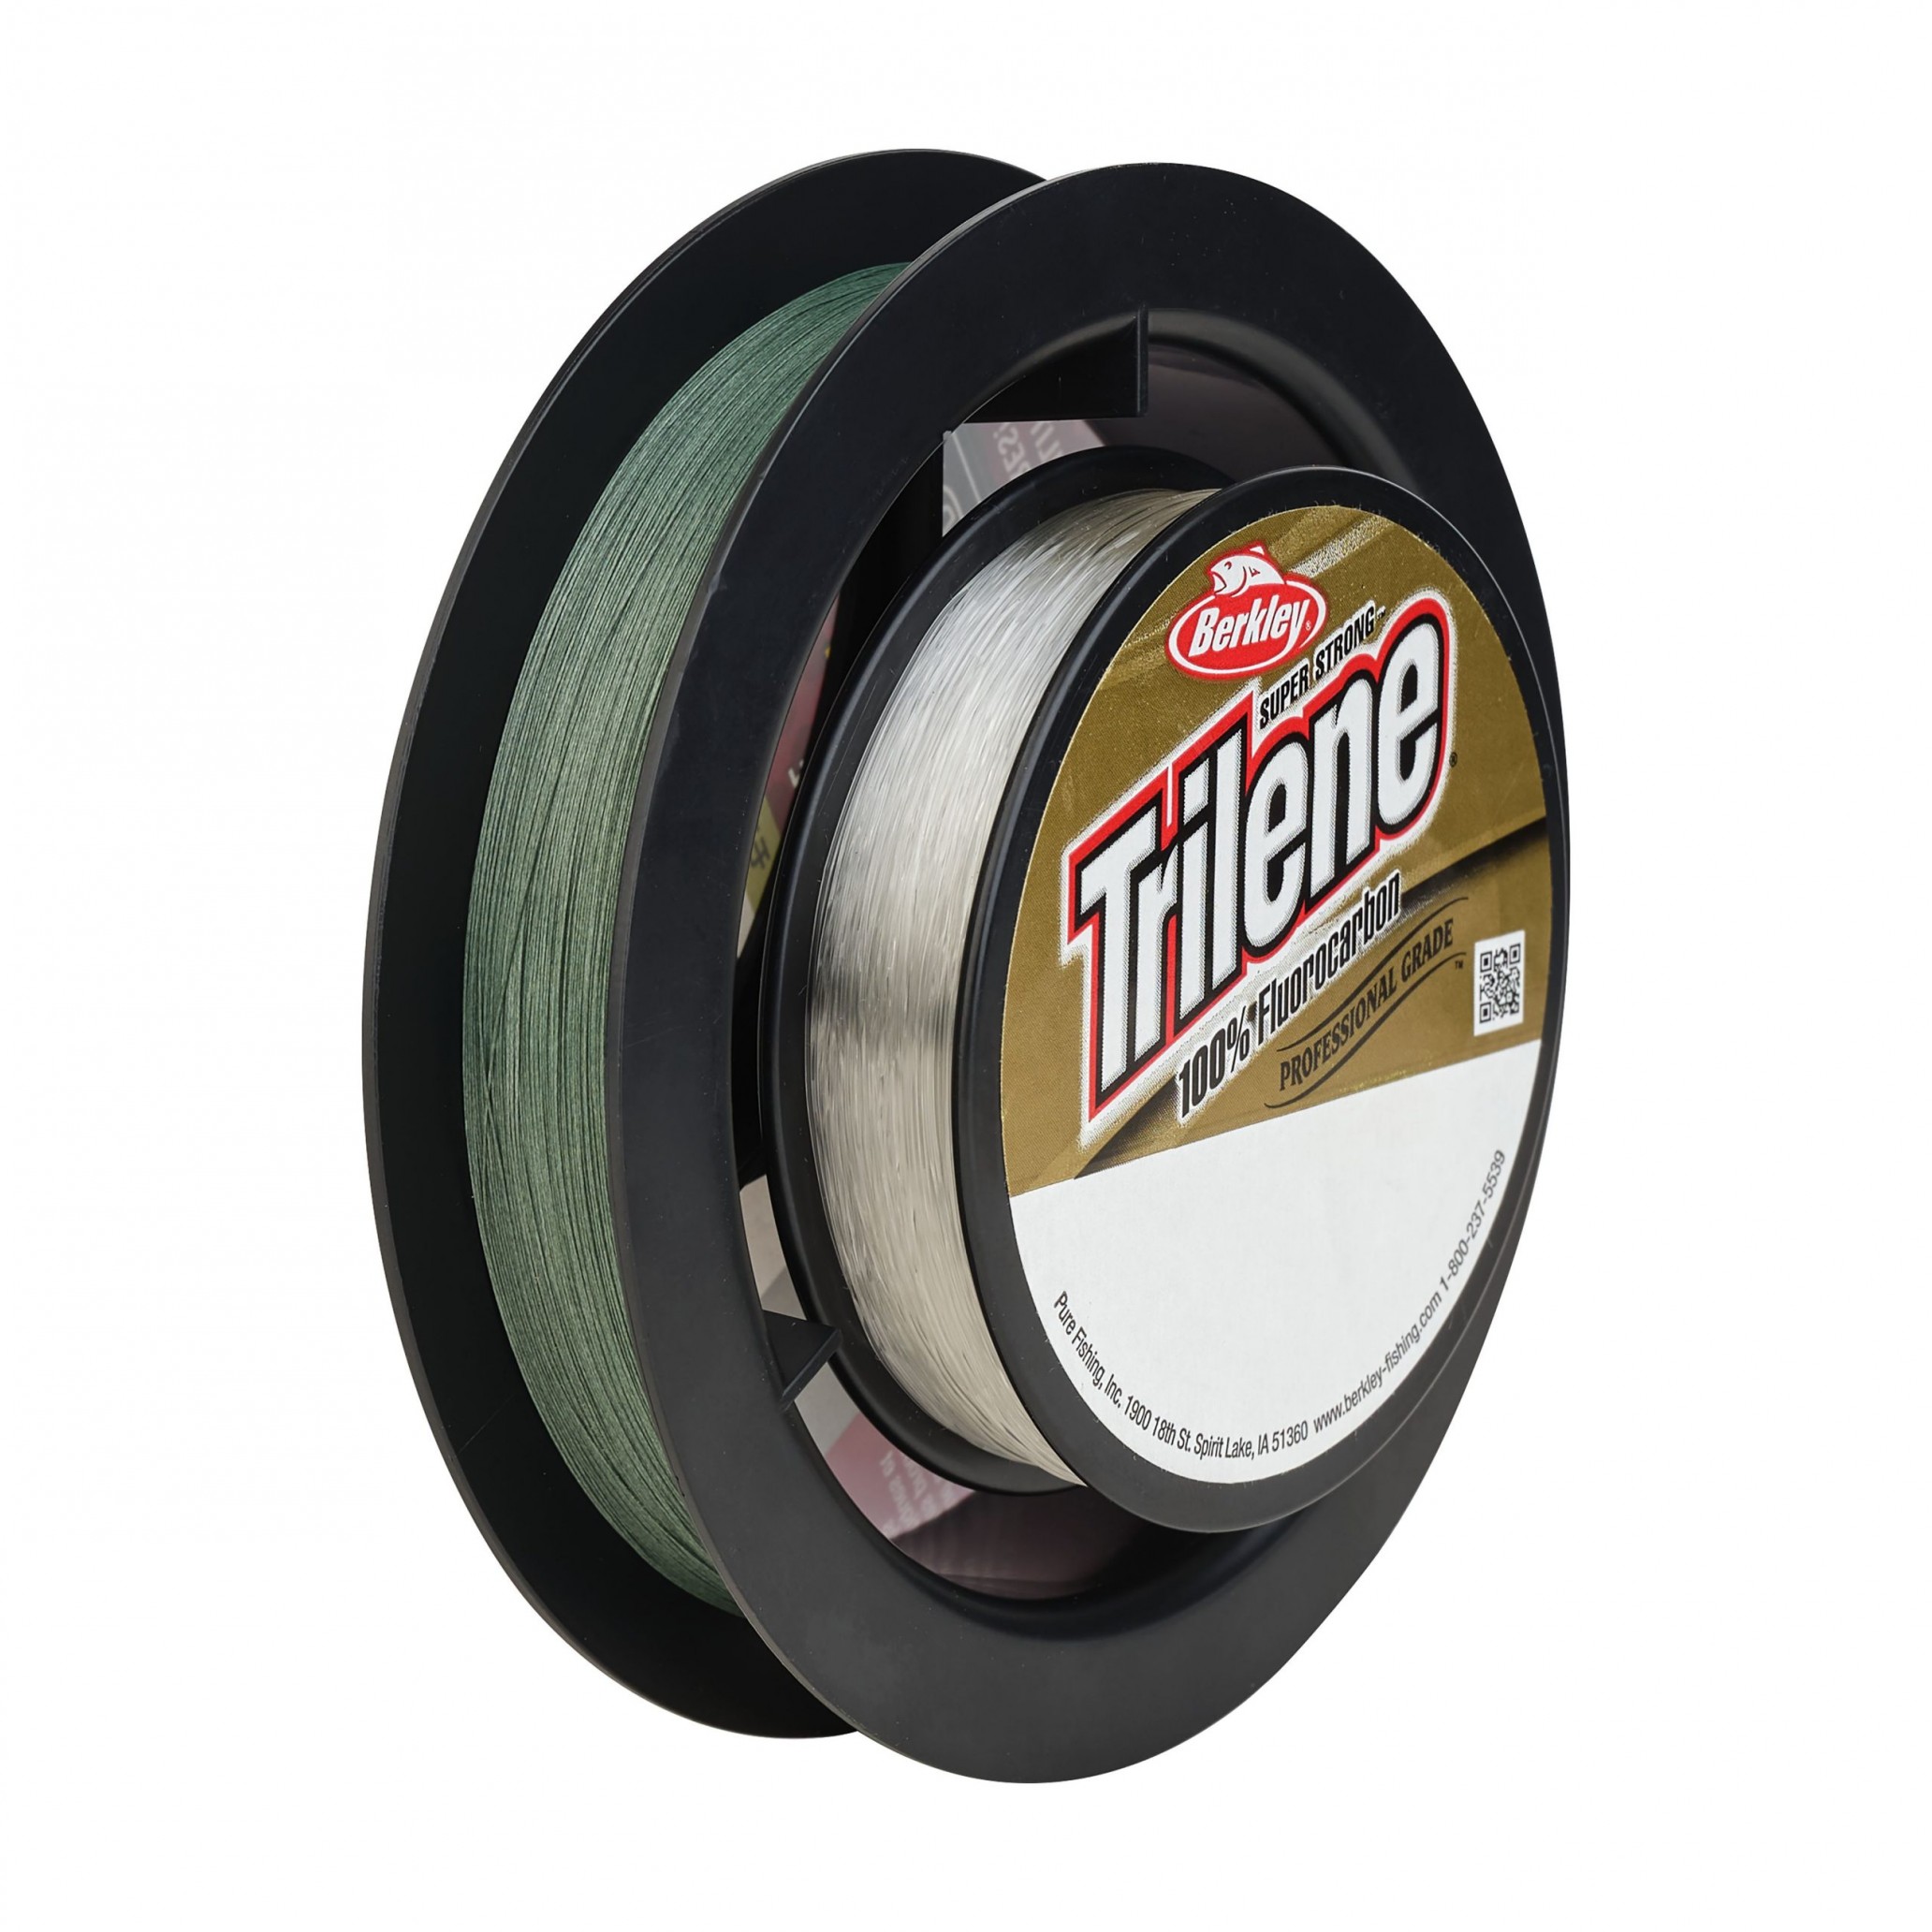 Berkley and Spiderwire Dual Spools – Anglers Channel